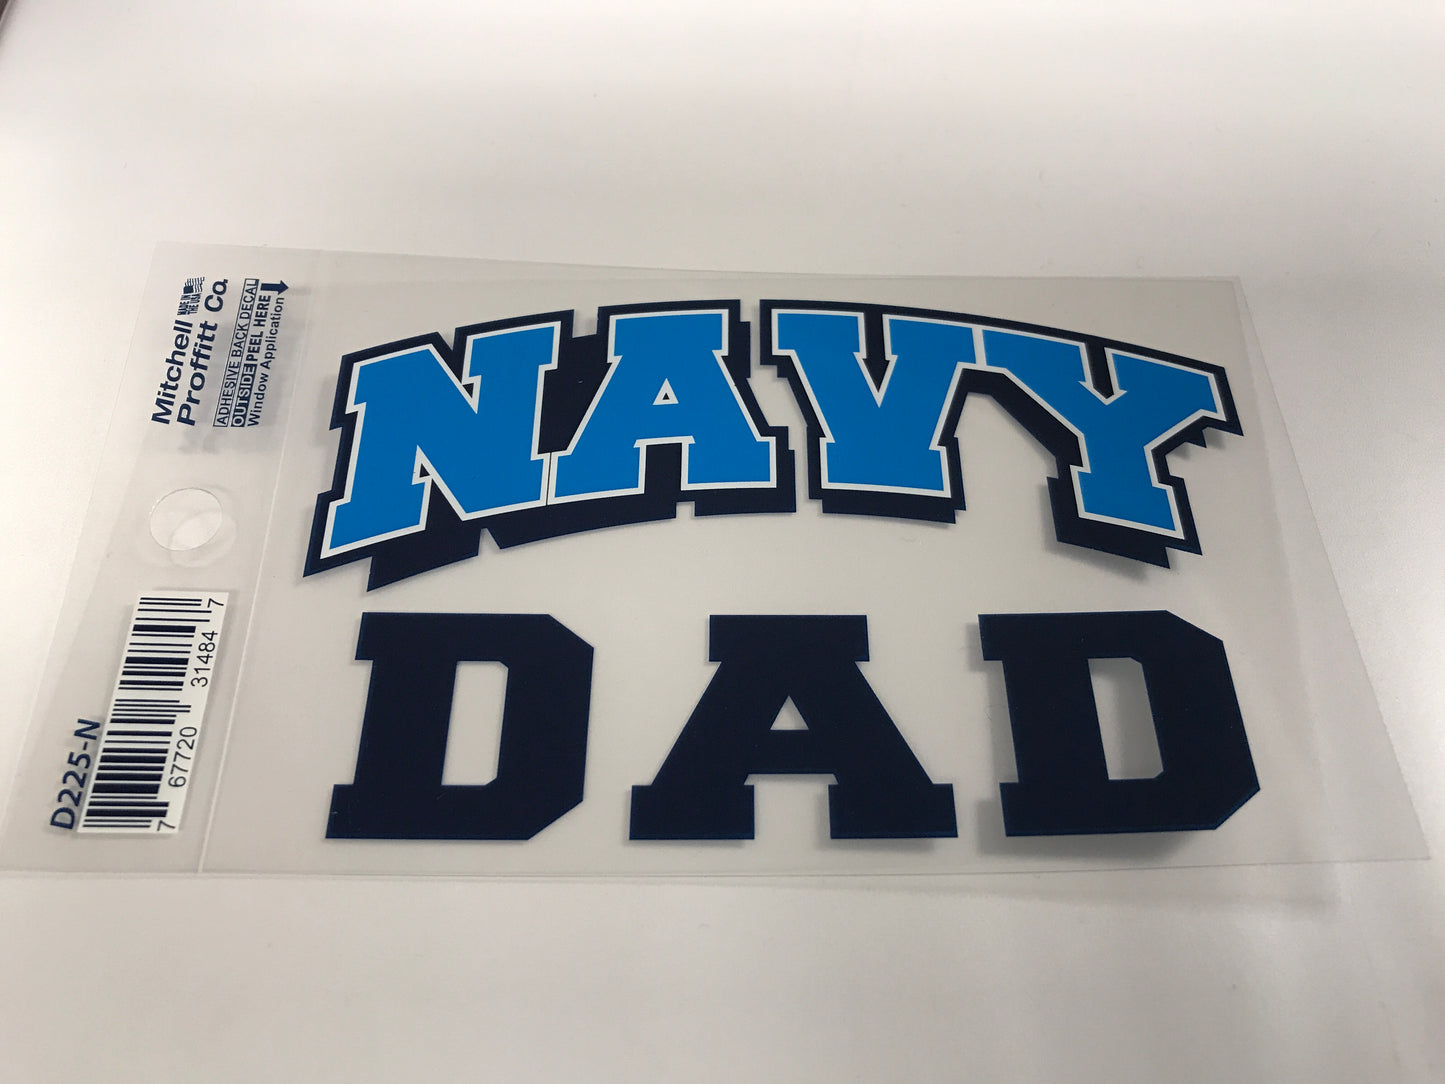 Navy Dad Decal